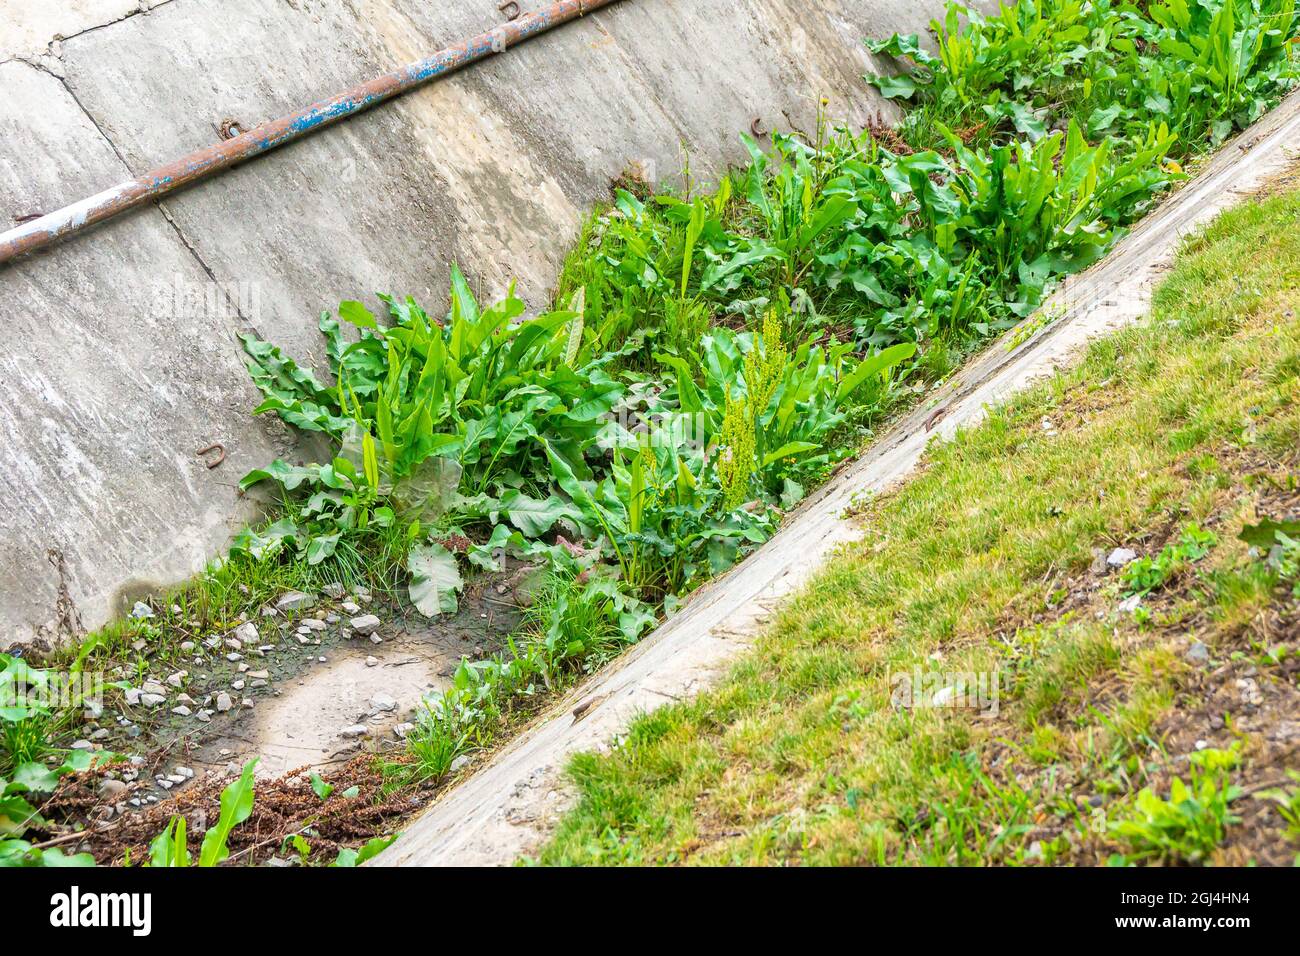 the drainage channel in the form of a gutter made of concrete slabs has not been serviced for a long time, it is overgrown with grass Stock Photo